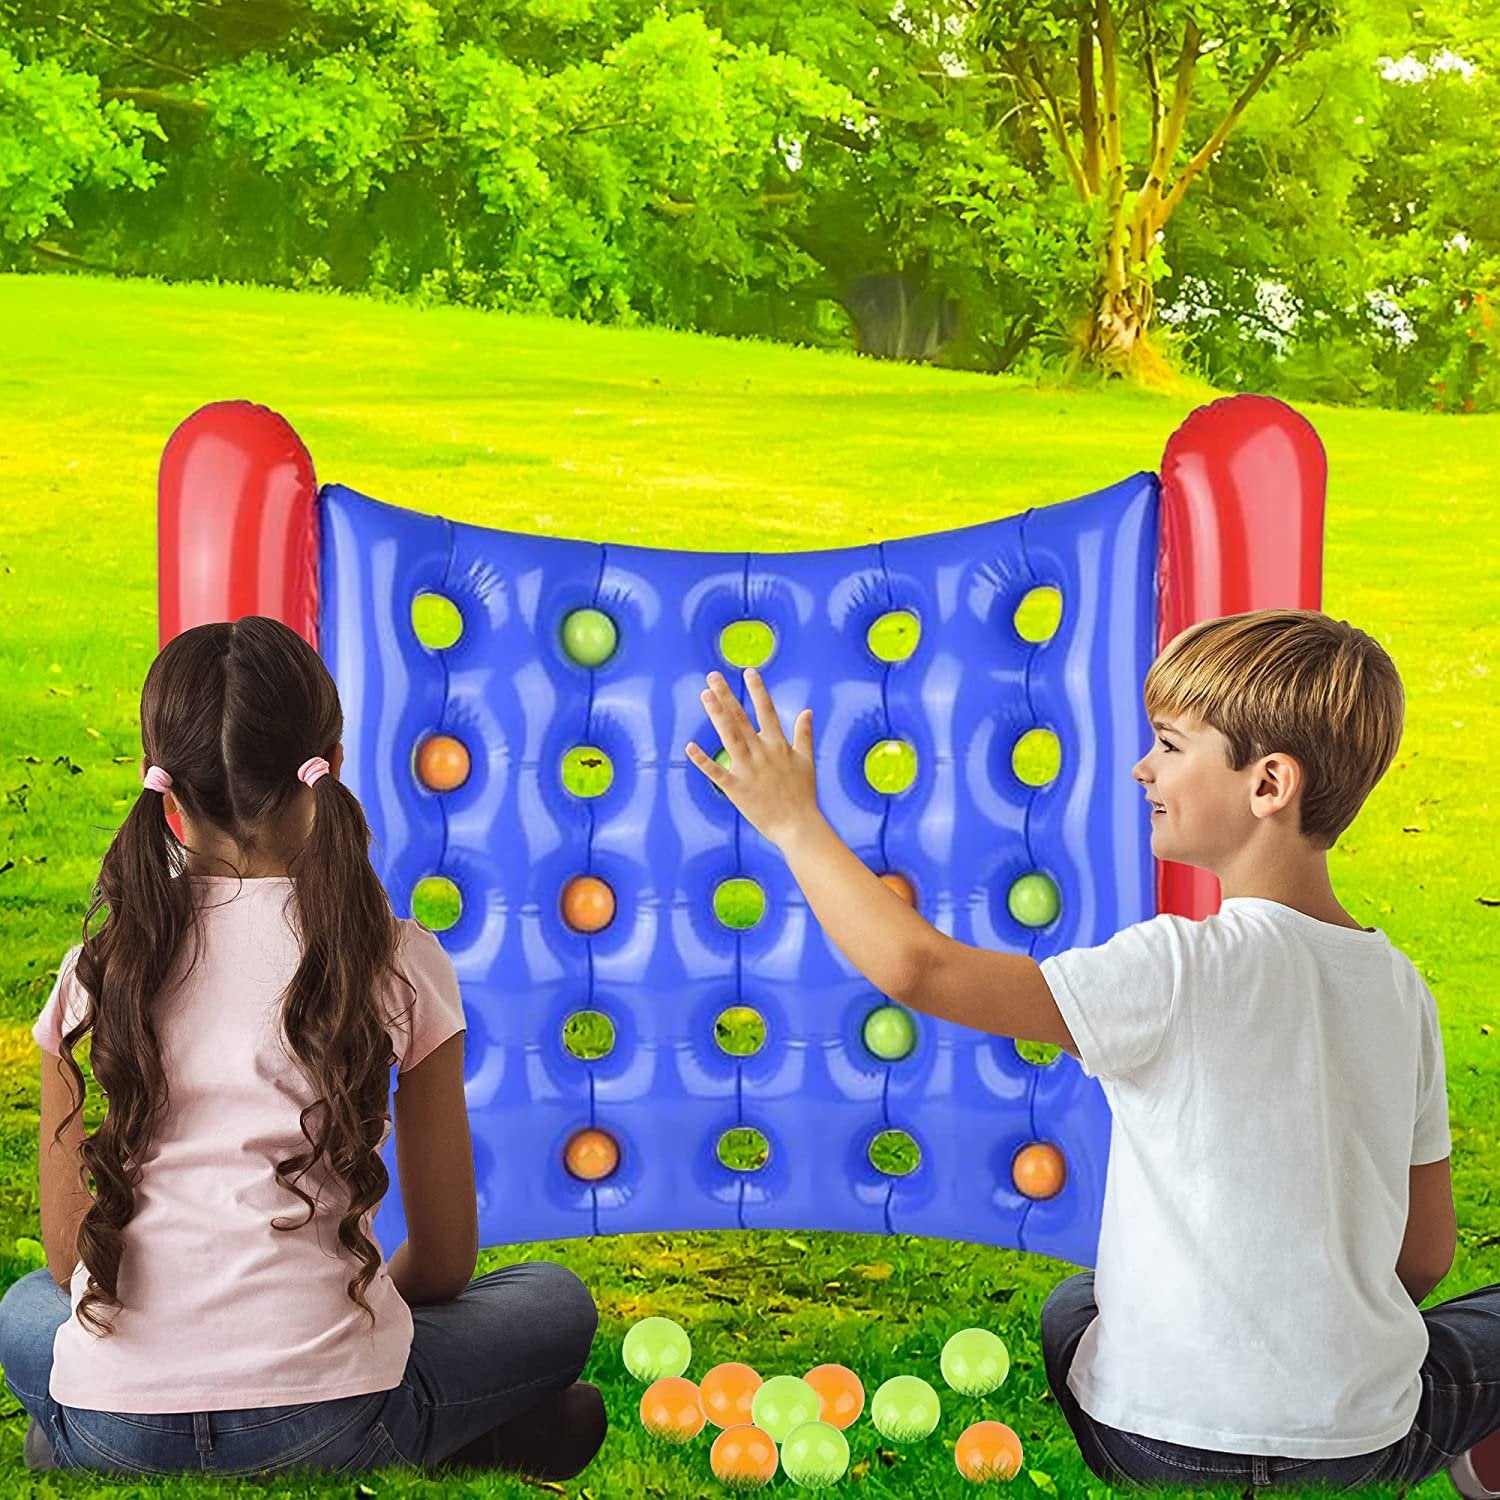 Giant Inflatable 4 in a Row Game - Inflatable Game Board with 24 Balls - Fun Party Activity for Kids and Outdoors - Gamer Birthday Decorations for Boys and Girls